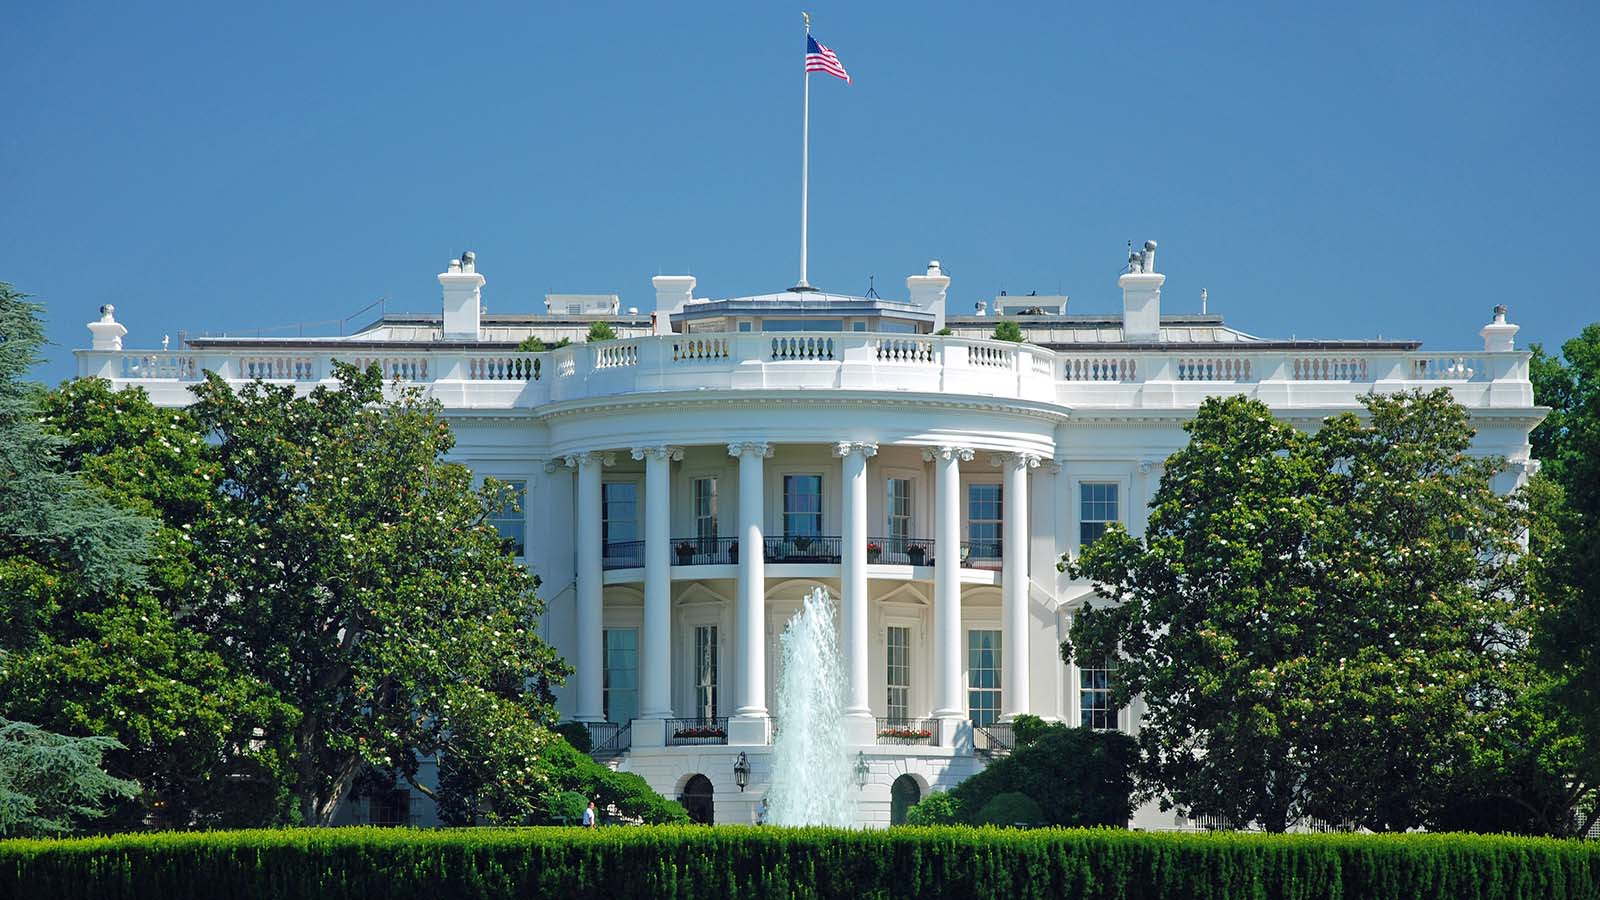 If You Can Get Over 12/15 on This General Knowledge Quiz, You’re Possibly the Smartest Person Ever White House, Washington, D.C., United States